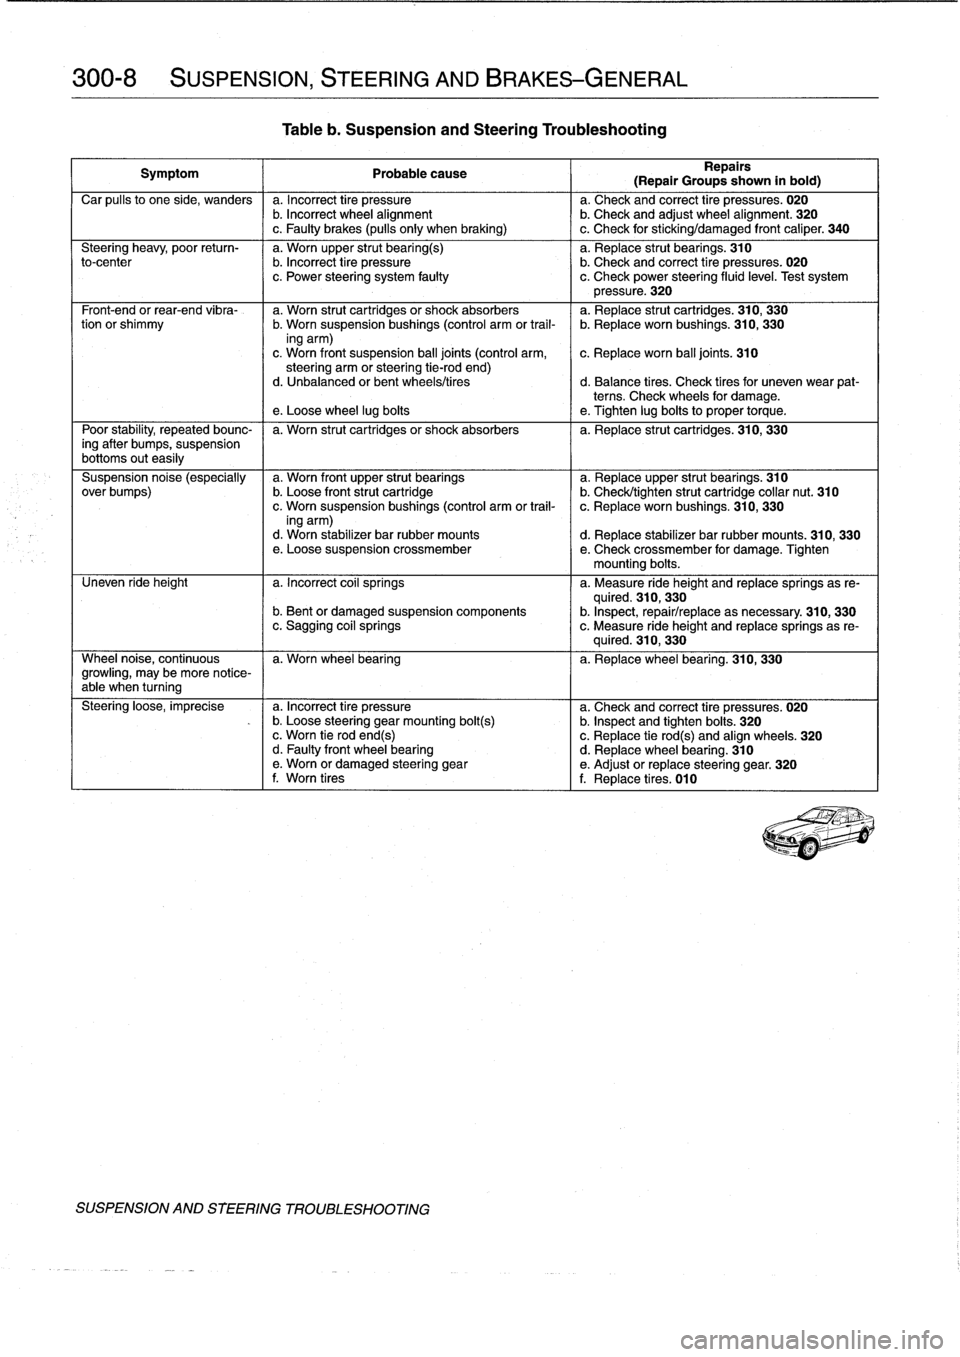 BMW 318i 1998 E36 Workshop Manual 
300-8

	

SUSPENSION,
STEERING
AND
BRAKES-GENERAL

Tableb
.
Suspension
and
Steering
Troubleshooting

Symptom

	

1

	

Probable
cause
Repairs
(Repair
Groups
shown
in
bold)

Car
pulís
to
one
side,
wa